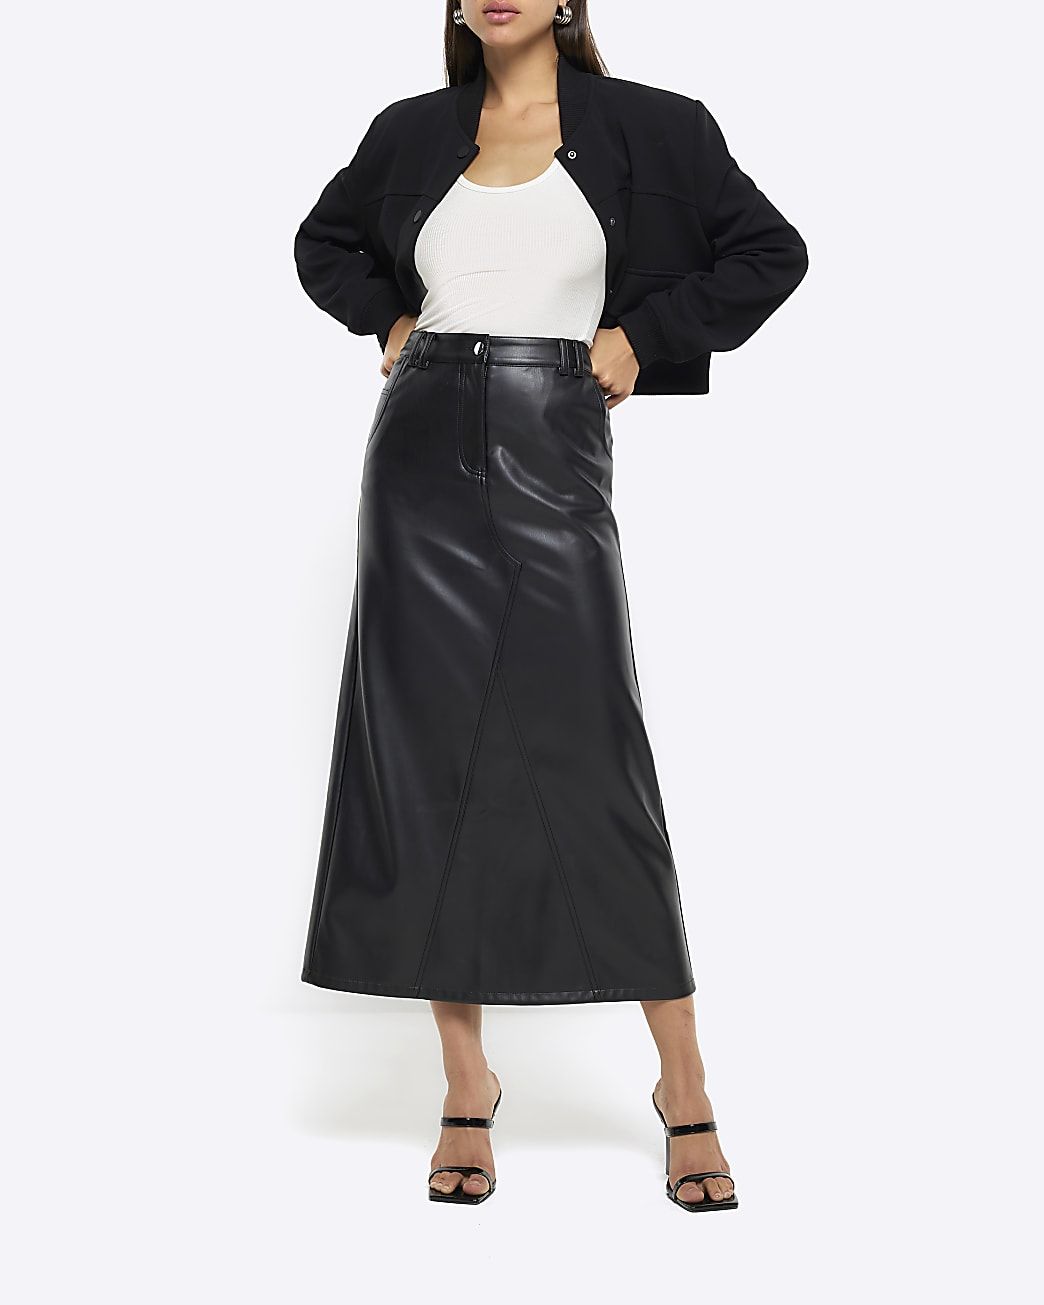 Best black leather skirt - Black leather skirts for a/w 2023